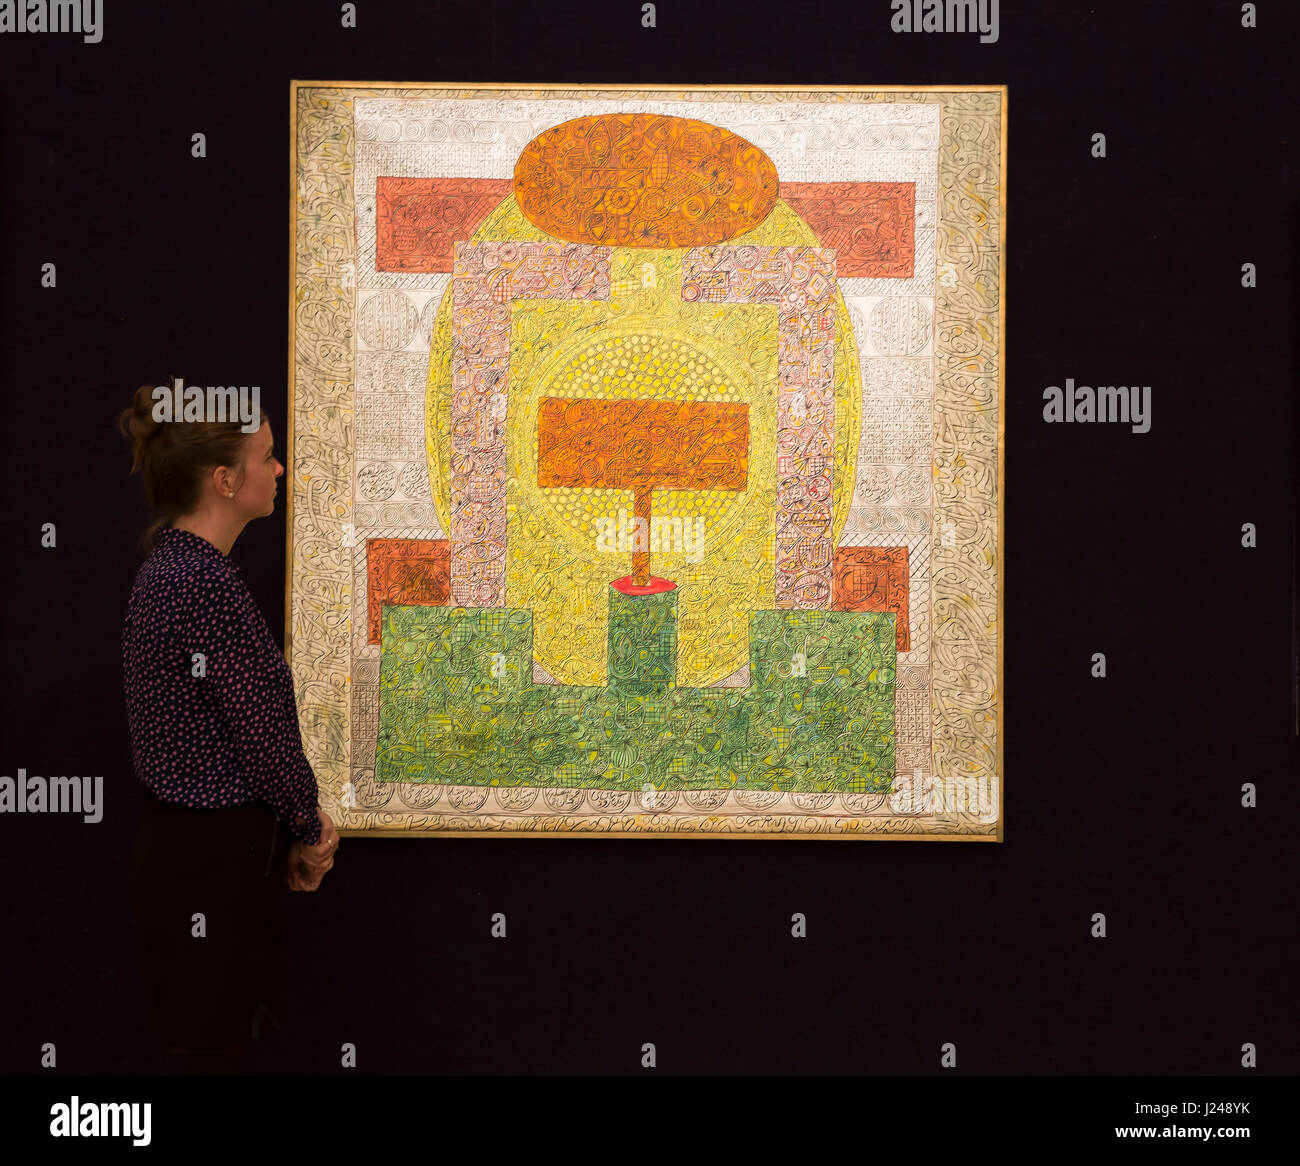 Mayfair, UK. 24th Apr, 2017. A Photocall for Masterpieces of Modern Middle Eastern Art at Bonhams in Mayfair took place prior to the Sale on the 26th April 2017. Highlights include Mir 54 Bz S by Charles Hossein Zenderoudi Credit: Keith Larby/Alamy Live News Stock Photo